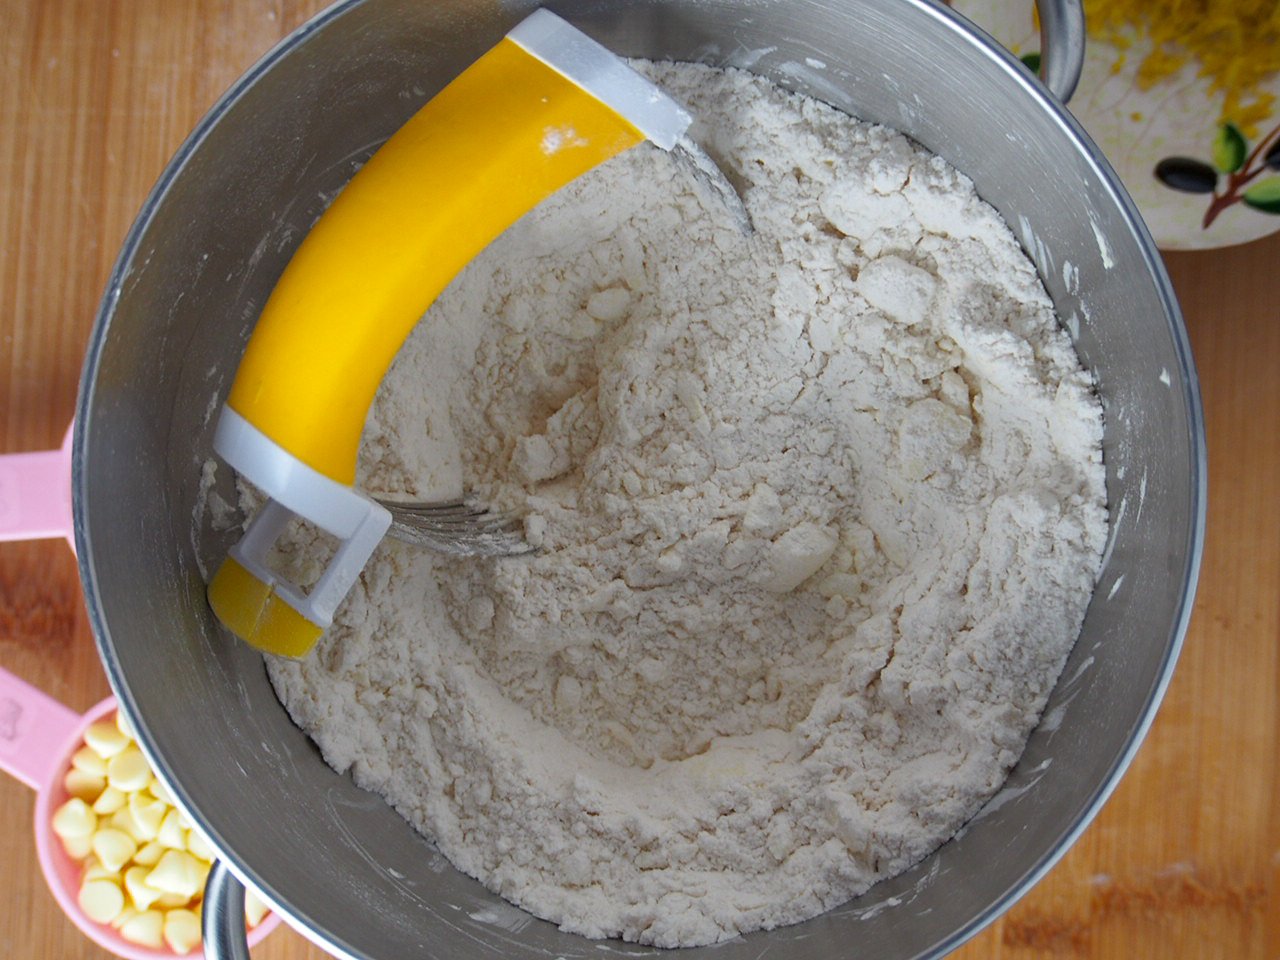 Cutting the butter in the dry ingredients to make the scones dough.